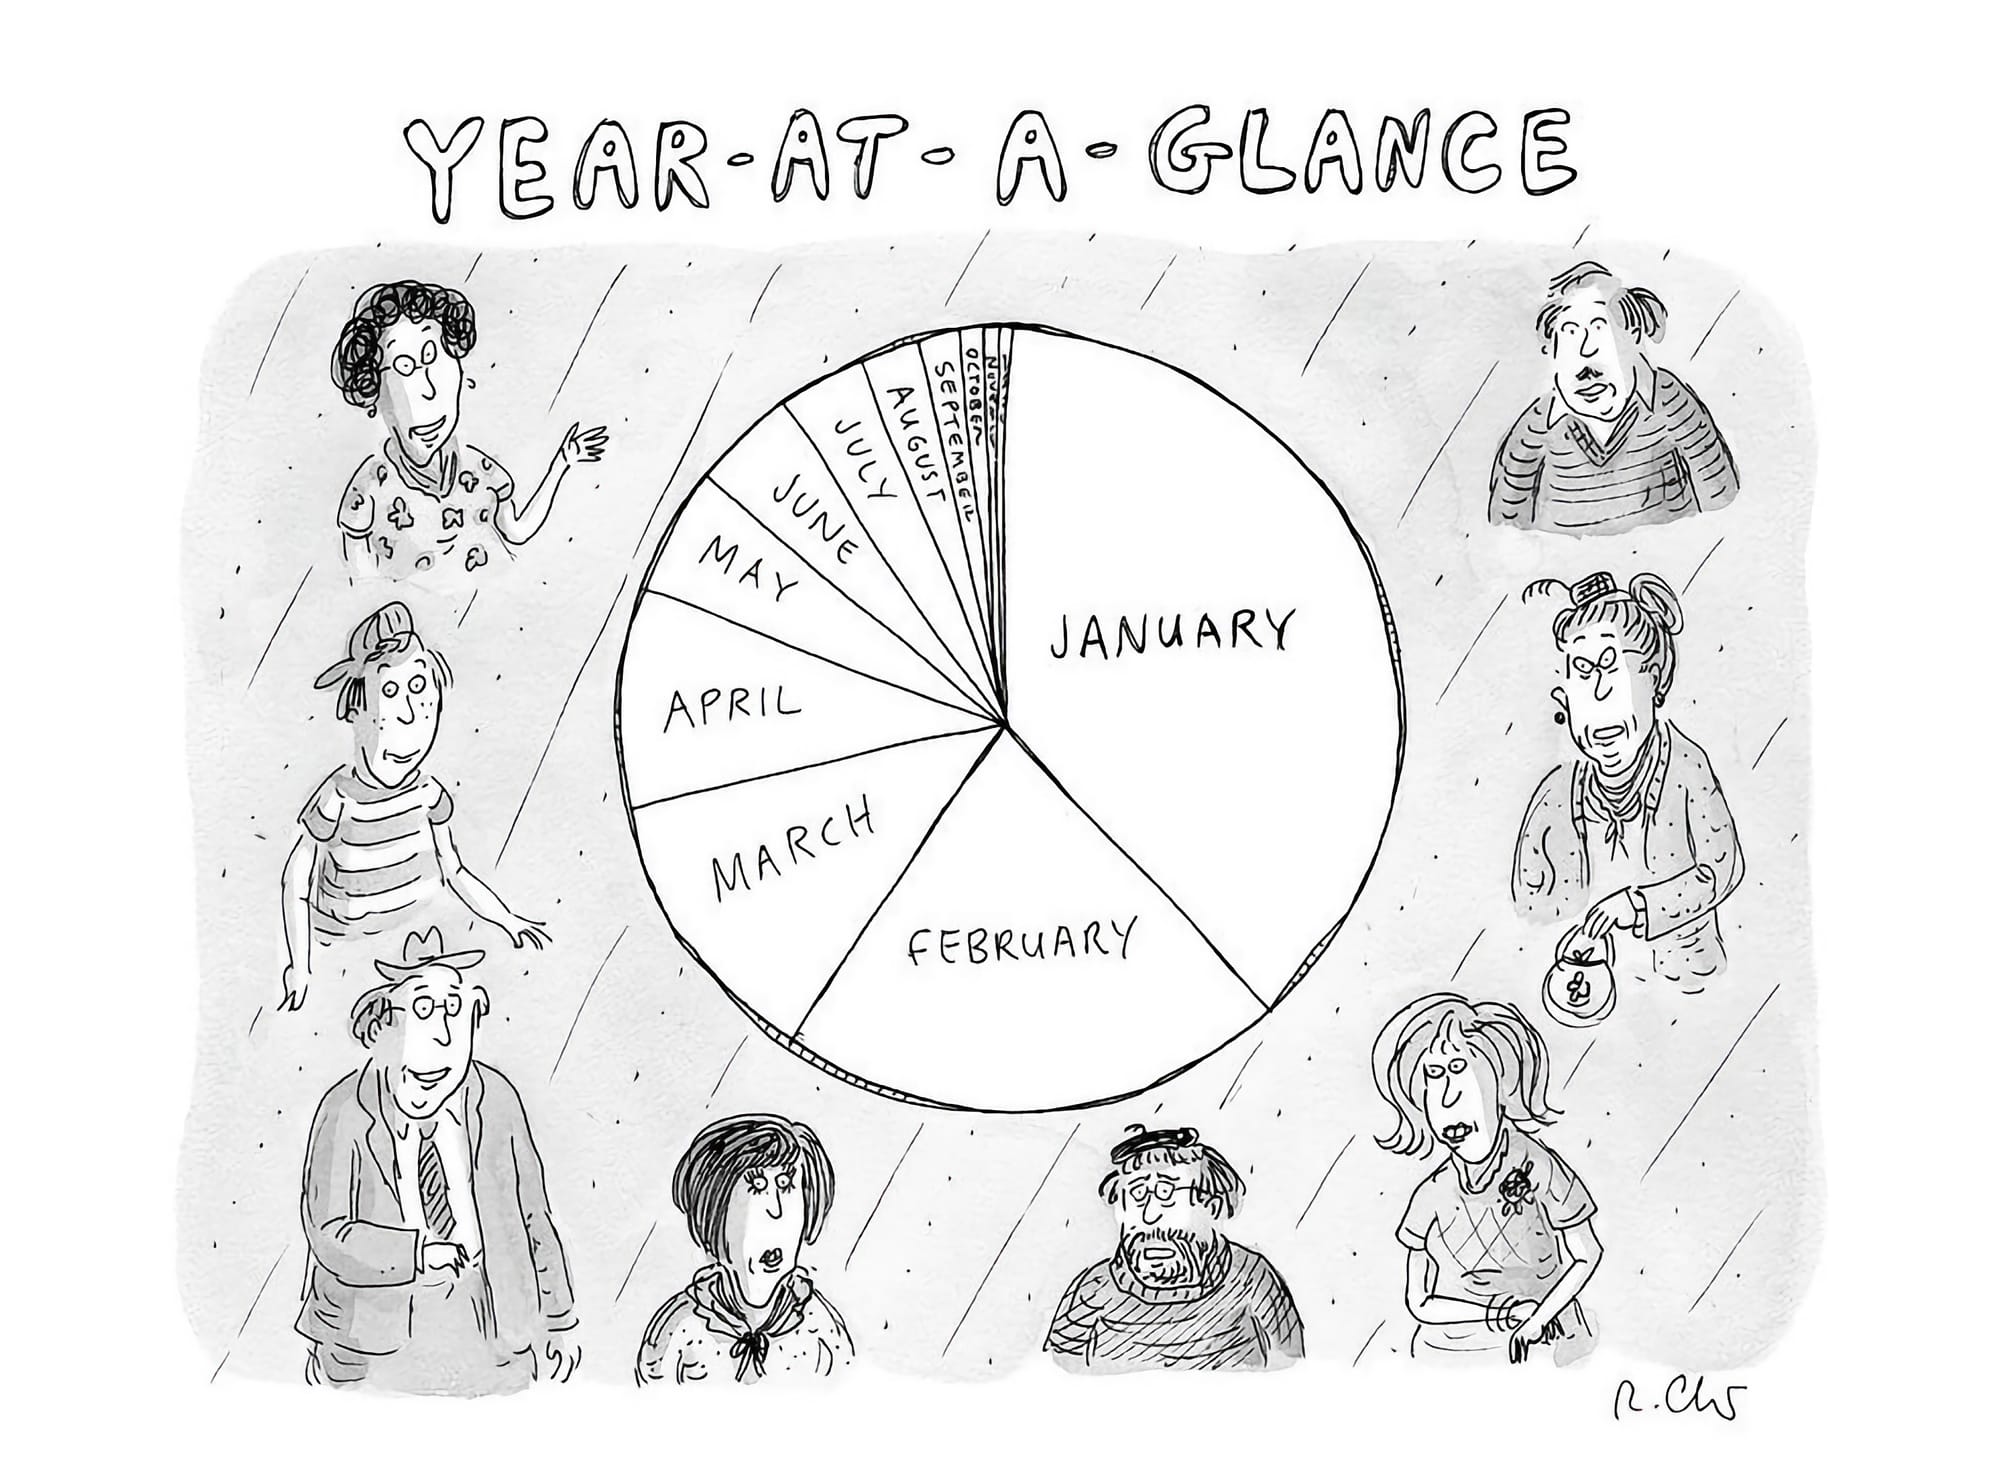 A cartoon by Roz Chast show people surrounding a graphic calendar year like a pie chart, with the pieces getting smaller as the year progresses.